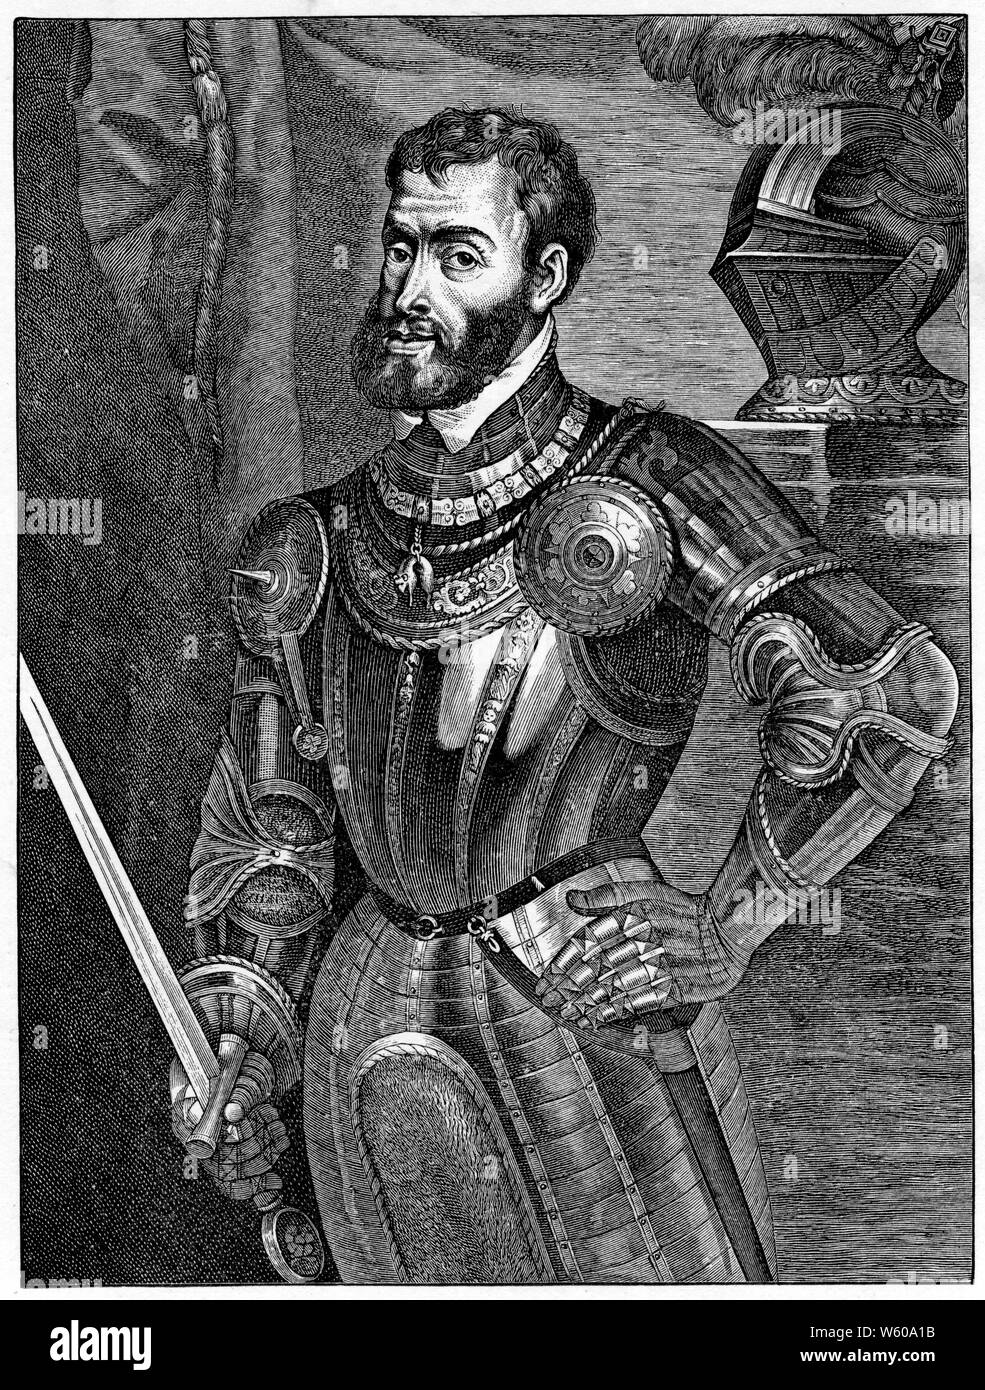 Charles V. After Titian (c1488-1576). Charles V (1500-1558), Holy Roman Emperor and Archduke of Austria from 1519 to 1556, King of Spain (Castile and Aragon) from 1516 to 1556, and Lord of the Netherlands as titular Duke of Burgundy from 1506 to 1555. Stock Photo